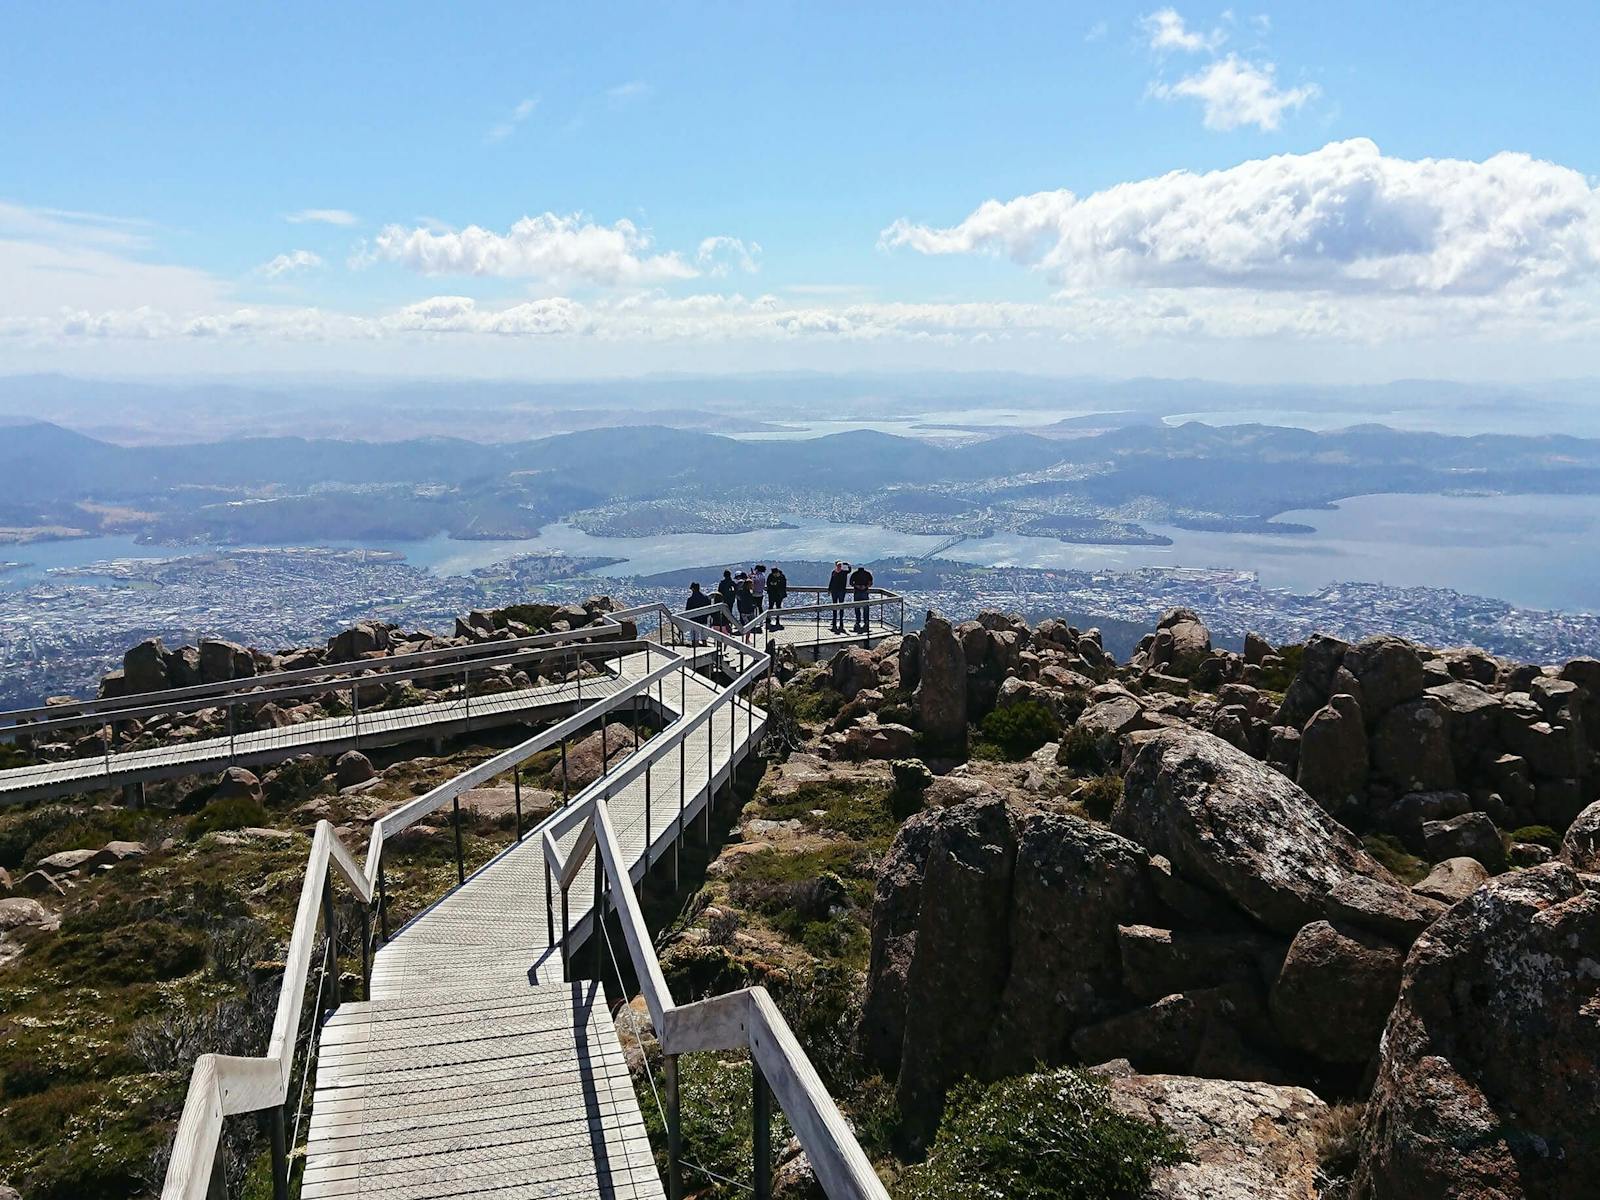 People at the The Pinnacle lookout, kunanyi/Mt Wellington.